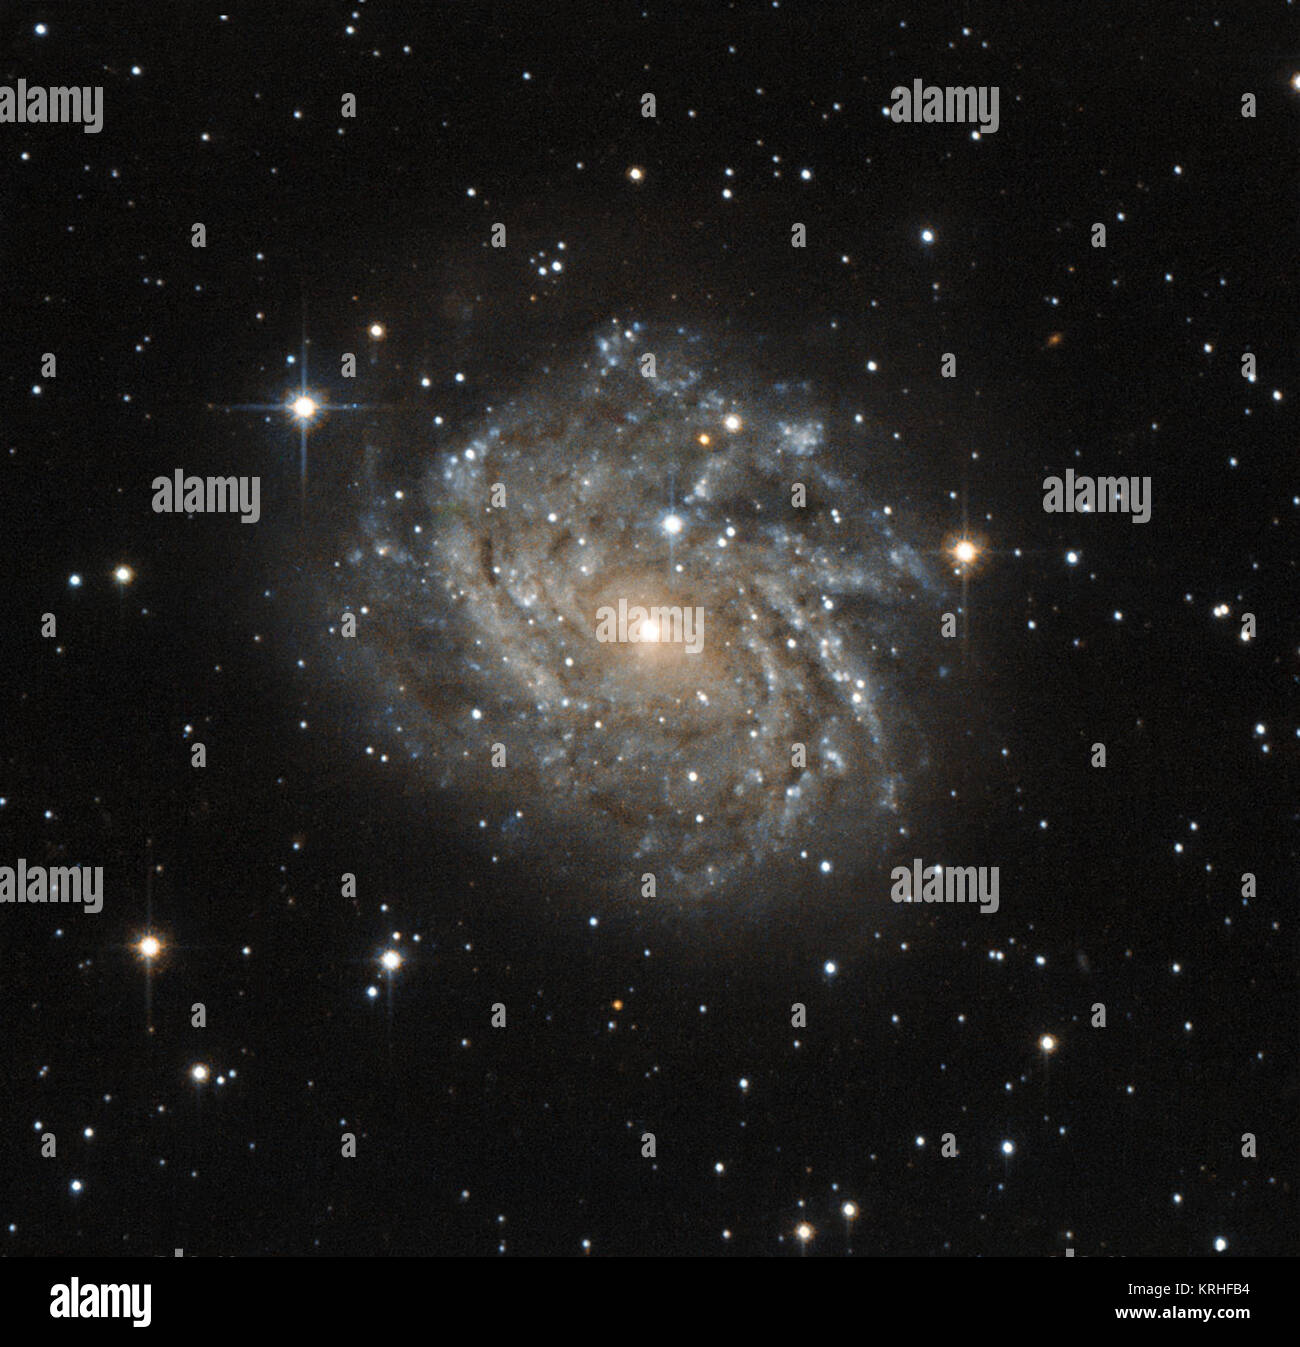 This little-known galaxy, officially named J04542829-6625280, but most often referred to as LEDA 89996, is a classic example of a spiral galaxy. The galaxy is much like our own galaxy, the Milky Way. The disc-shaped galaxy is seen face on, revealing the winding structure of the spiral arms. Dark patches in these spiral arms are in fact dust and gas — the raw materials for new stars. The many young stars that form in these regions make the spiral arms appear bright and bluish. The galaxy sits in a vibrant area of the night sky within the constellation of Dorado (The Swordfish), and appears very Stock Photo